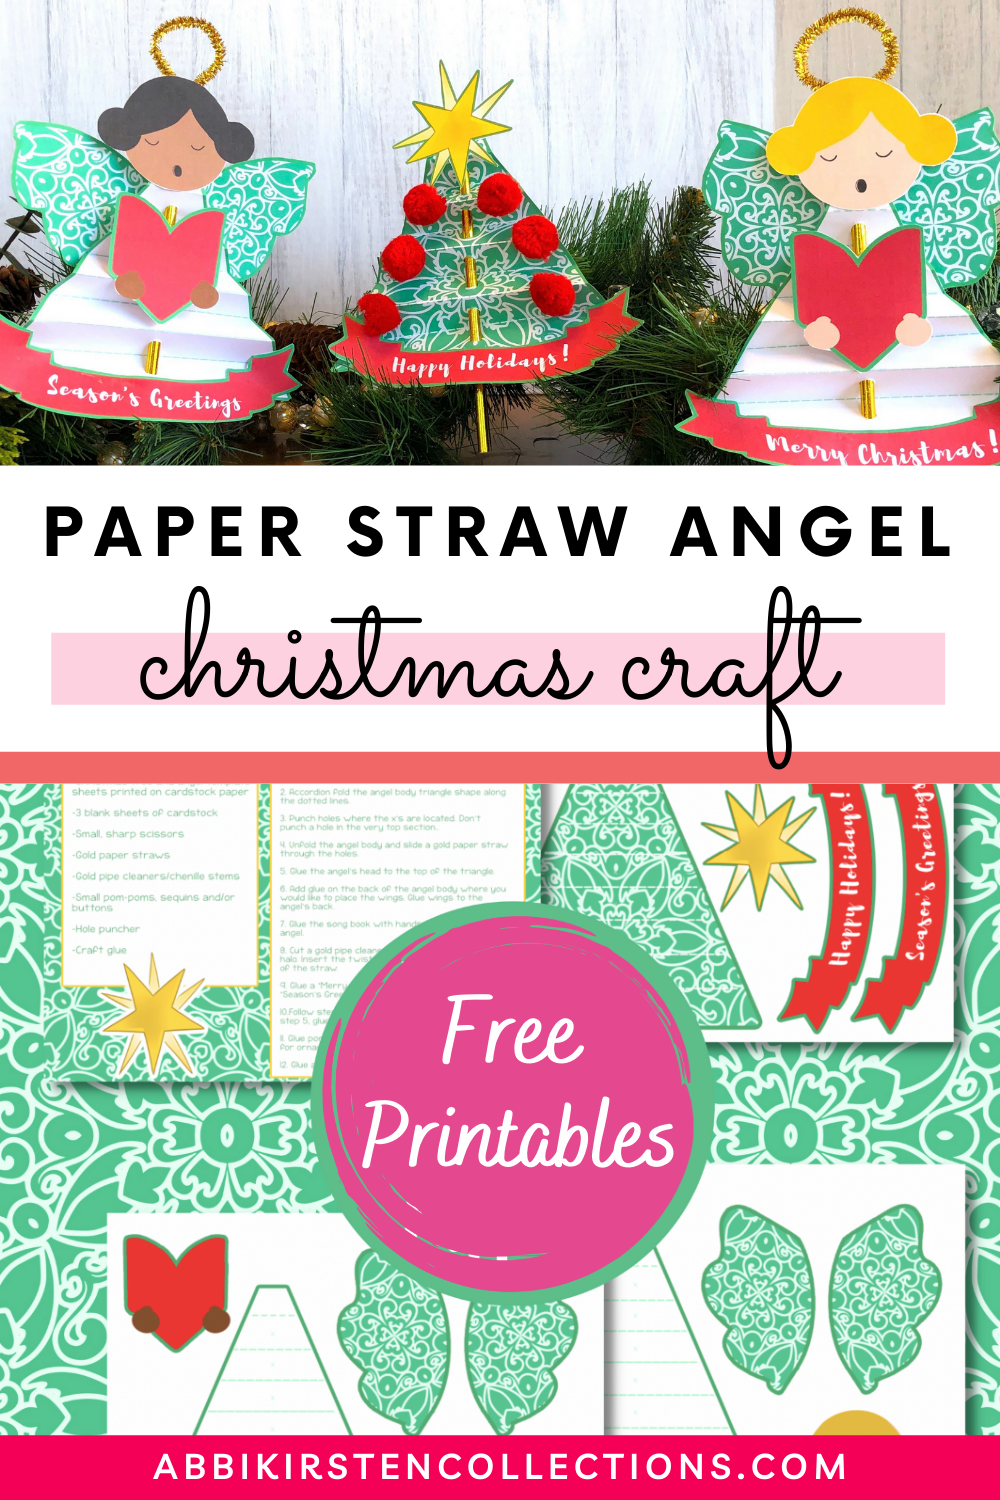 A large graphic shows a festive Christmas angel craft. The top half of the graphic shows three completed paper angel crafts. The text in the center of the image says, “Paper straw angel crafts.” The lower half of the image shows the different free printables included with the craft tutorial.